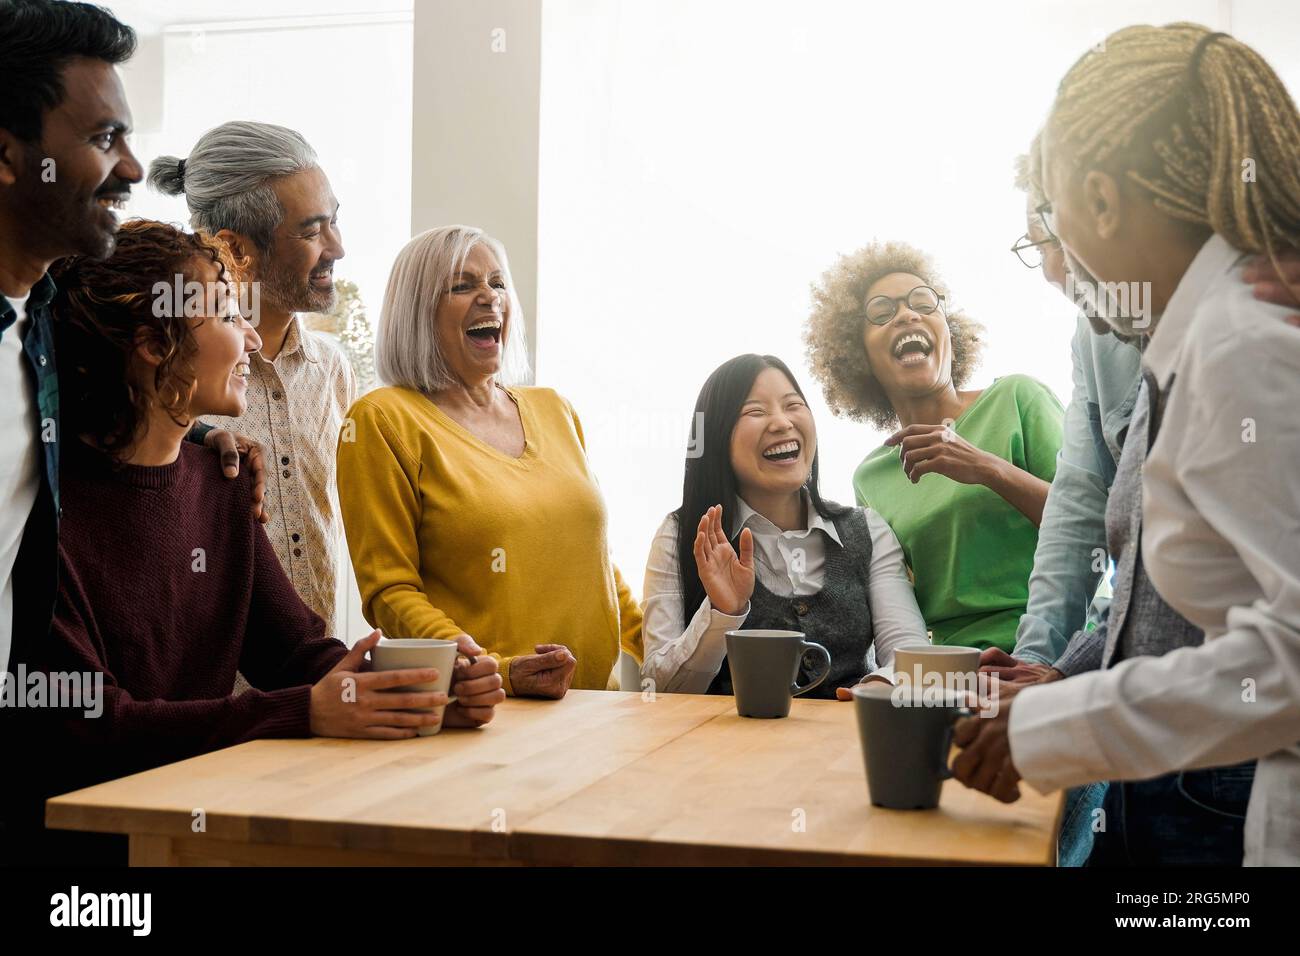 Happy multiethnic people drinking tea during lunch break at work - Group of multi-generational friends having fun laughing together - Soft focus on As Stock Photo